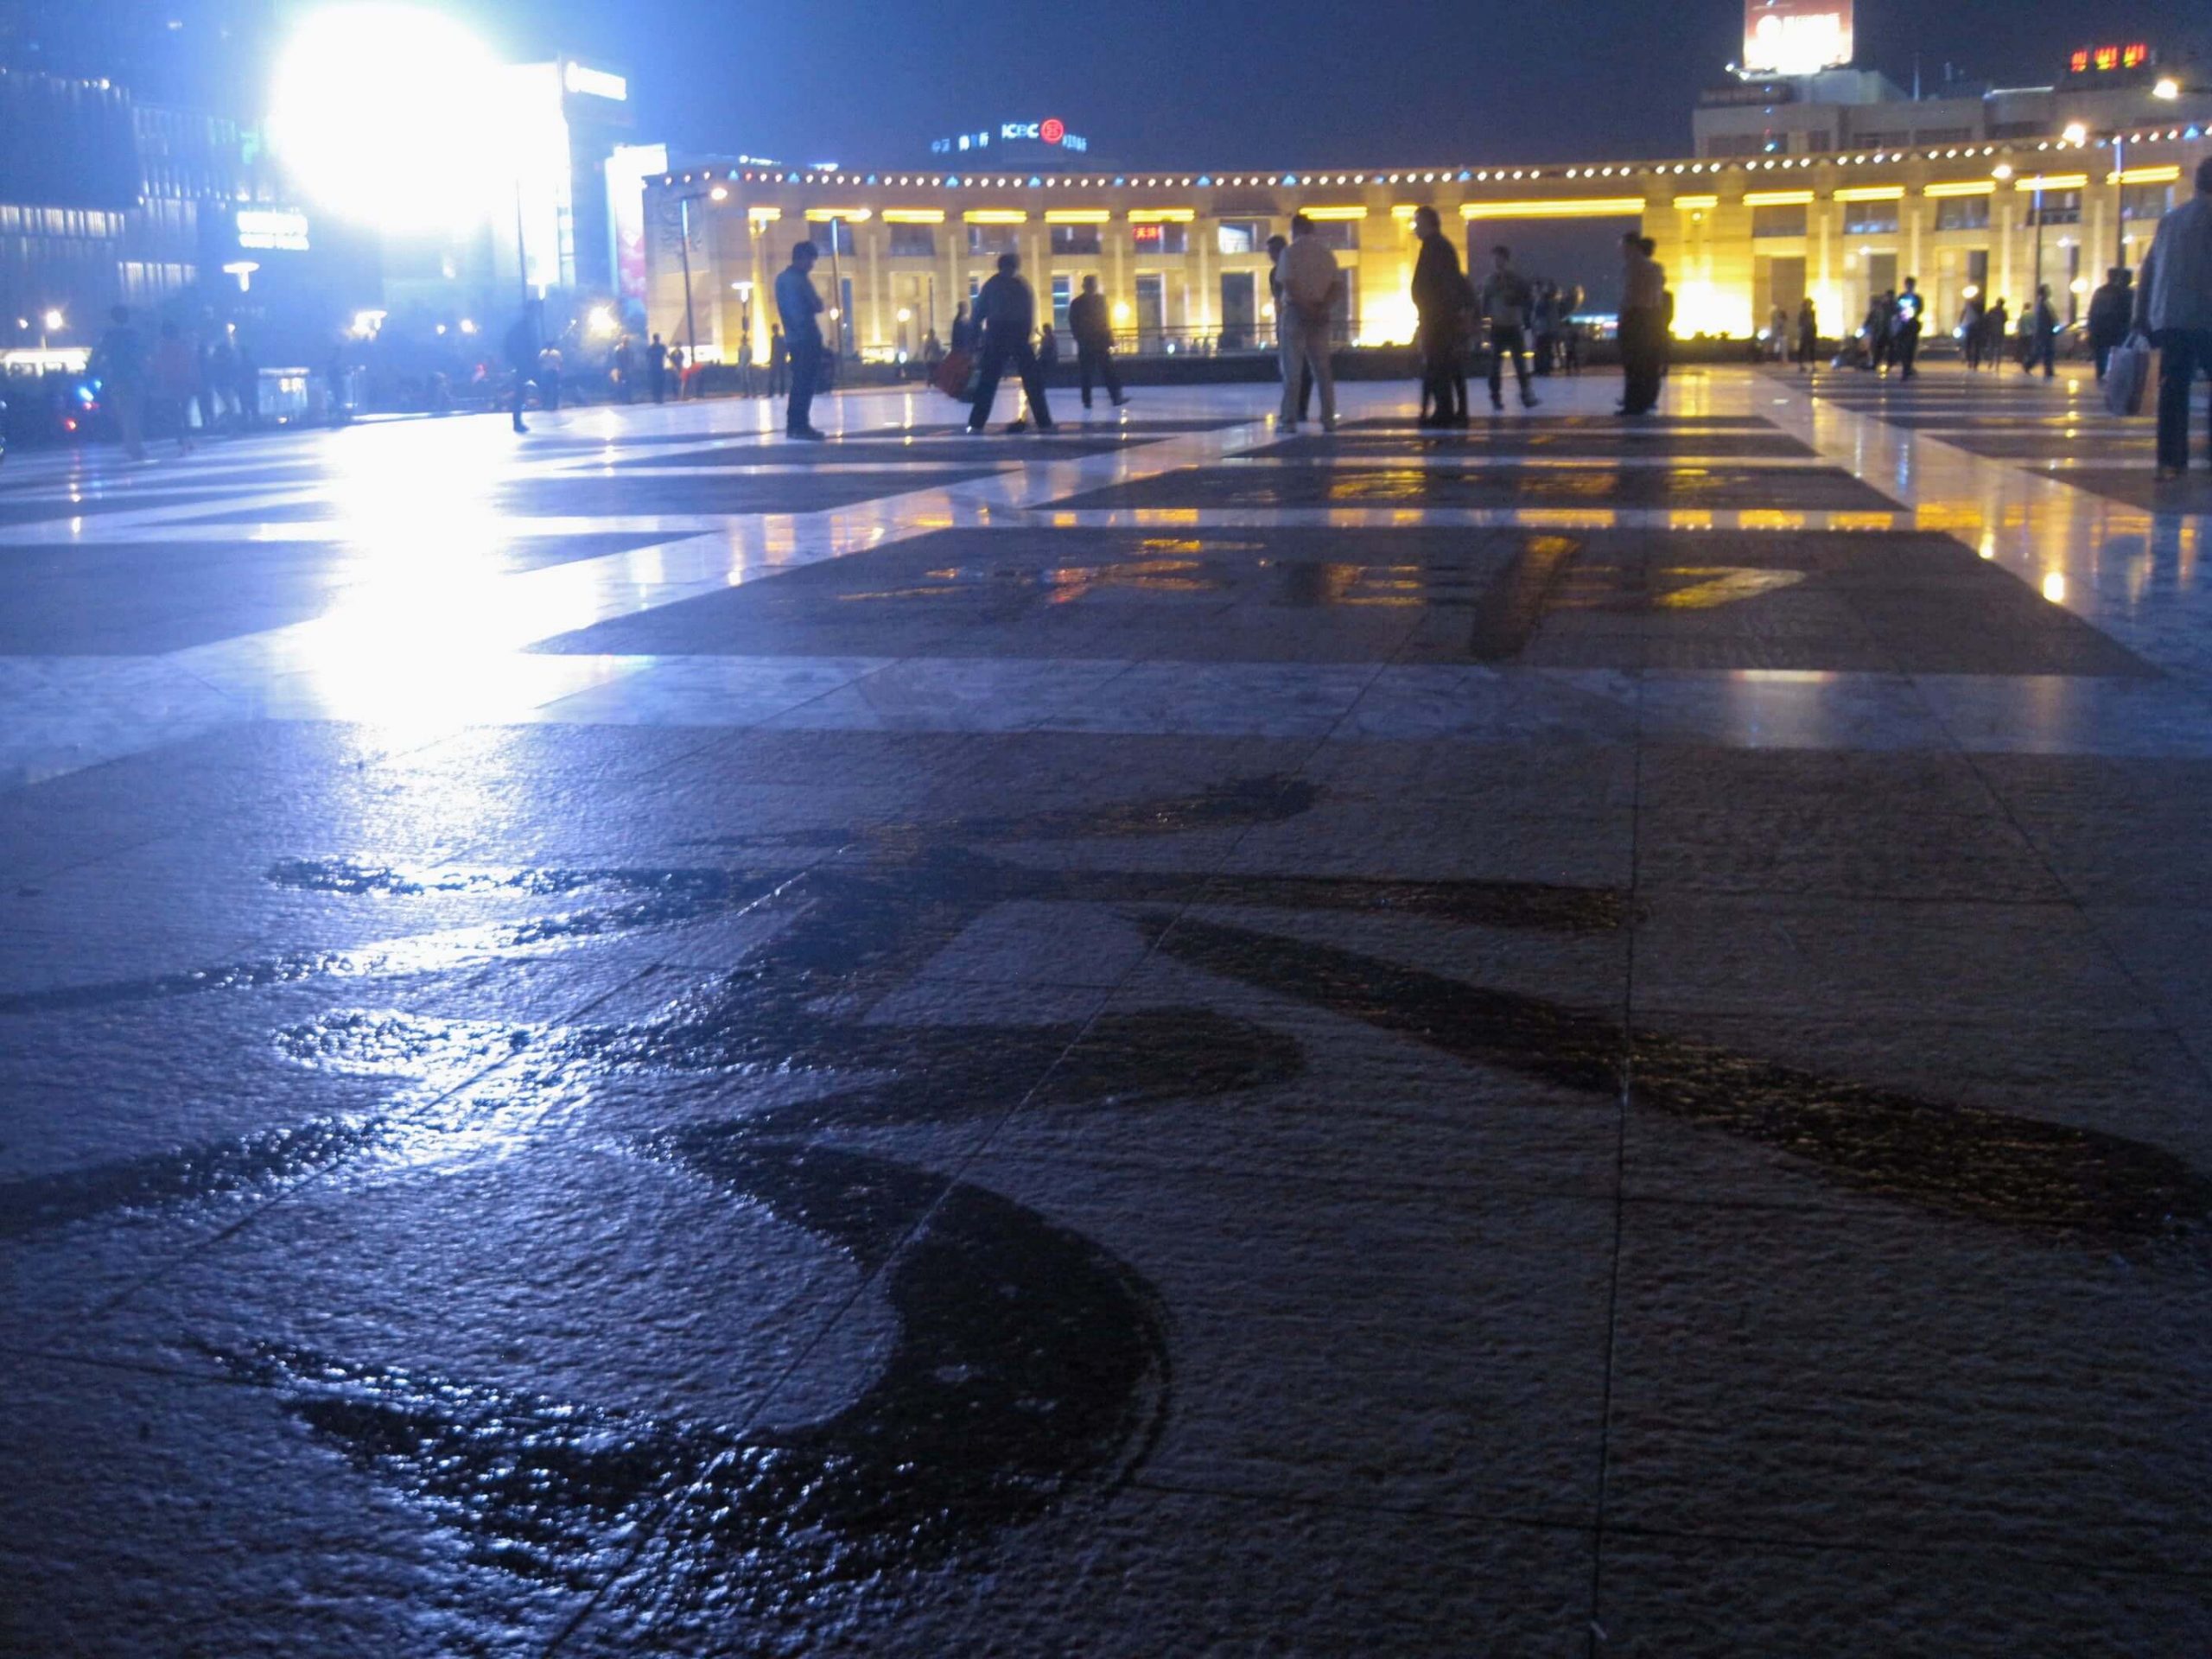 Trying to learn Mandarin from poetry written with a wet mop in a public square in Jinan, China. ©KettiWilhelm2014